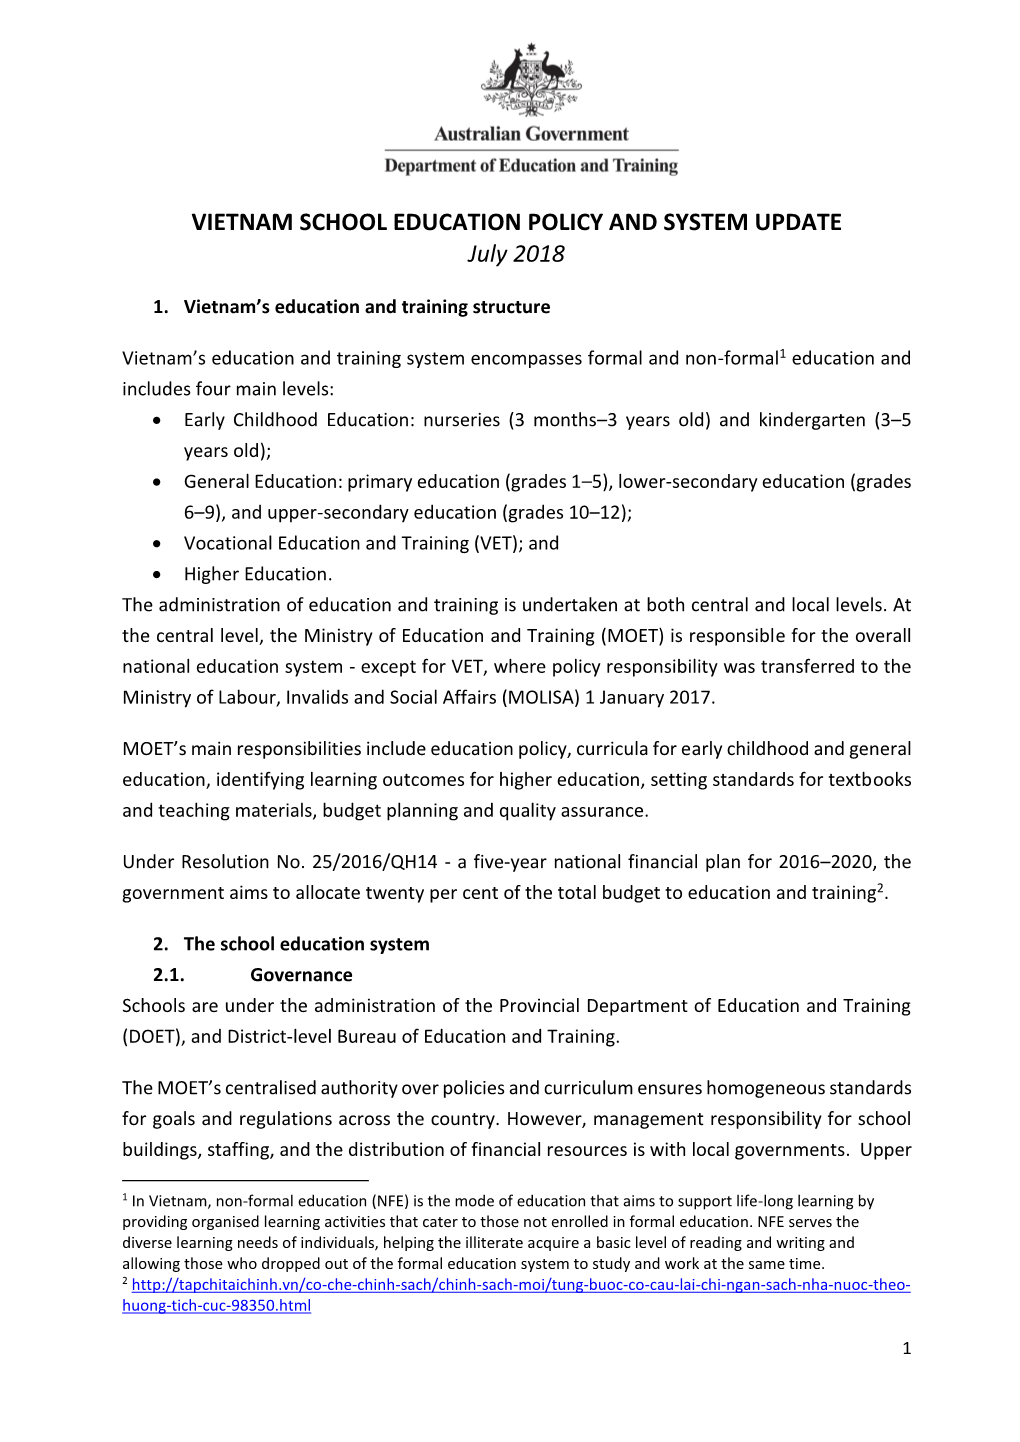 Vietnam School Education Policy and Systems Update.Pdf